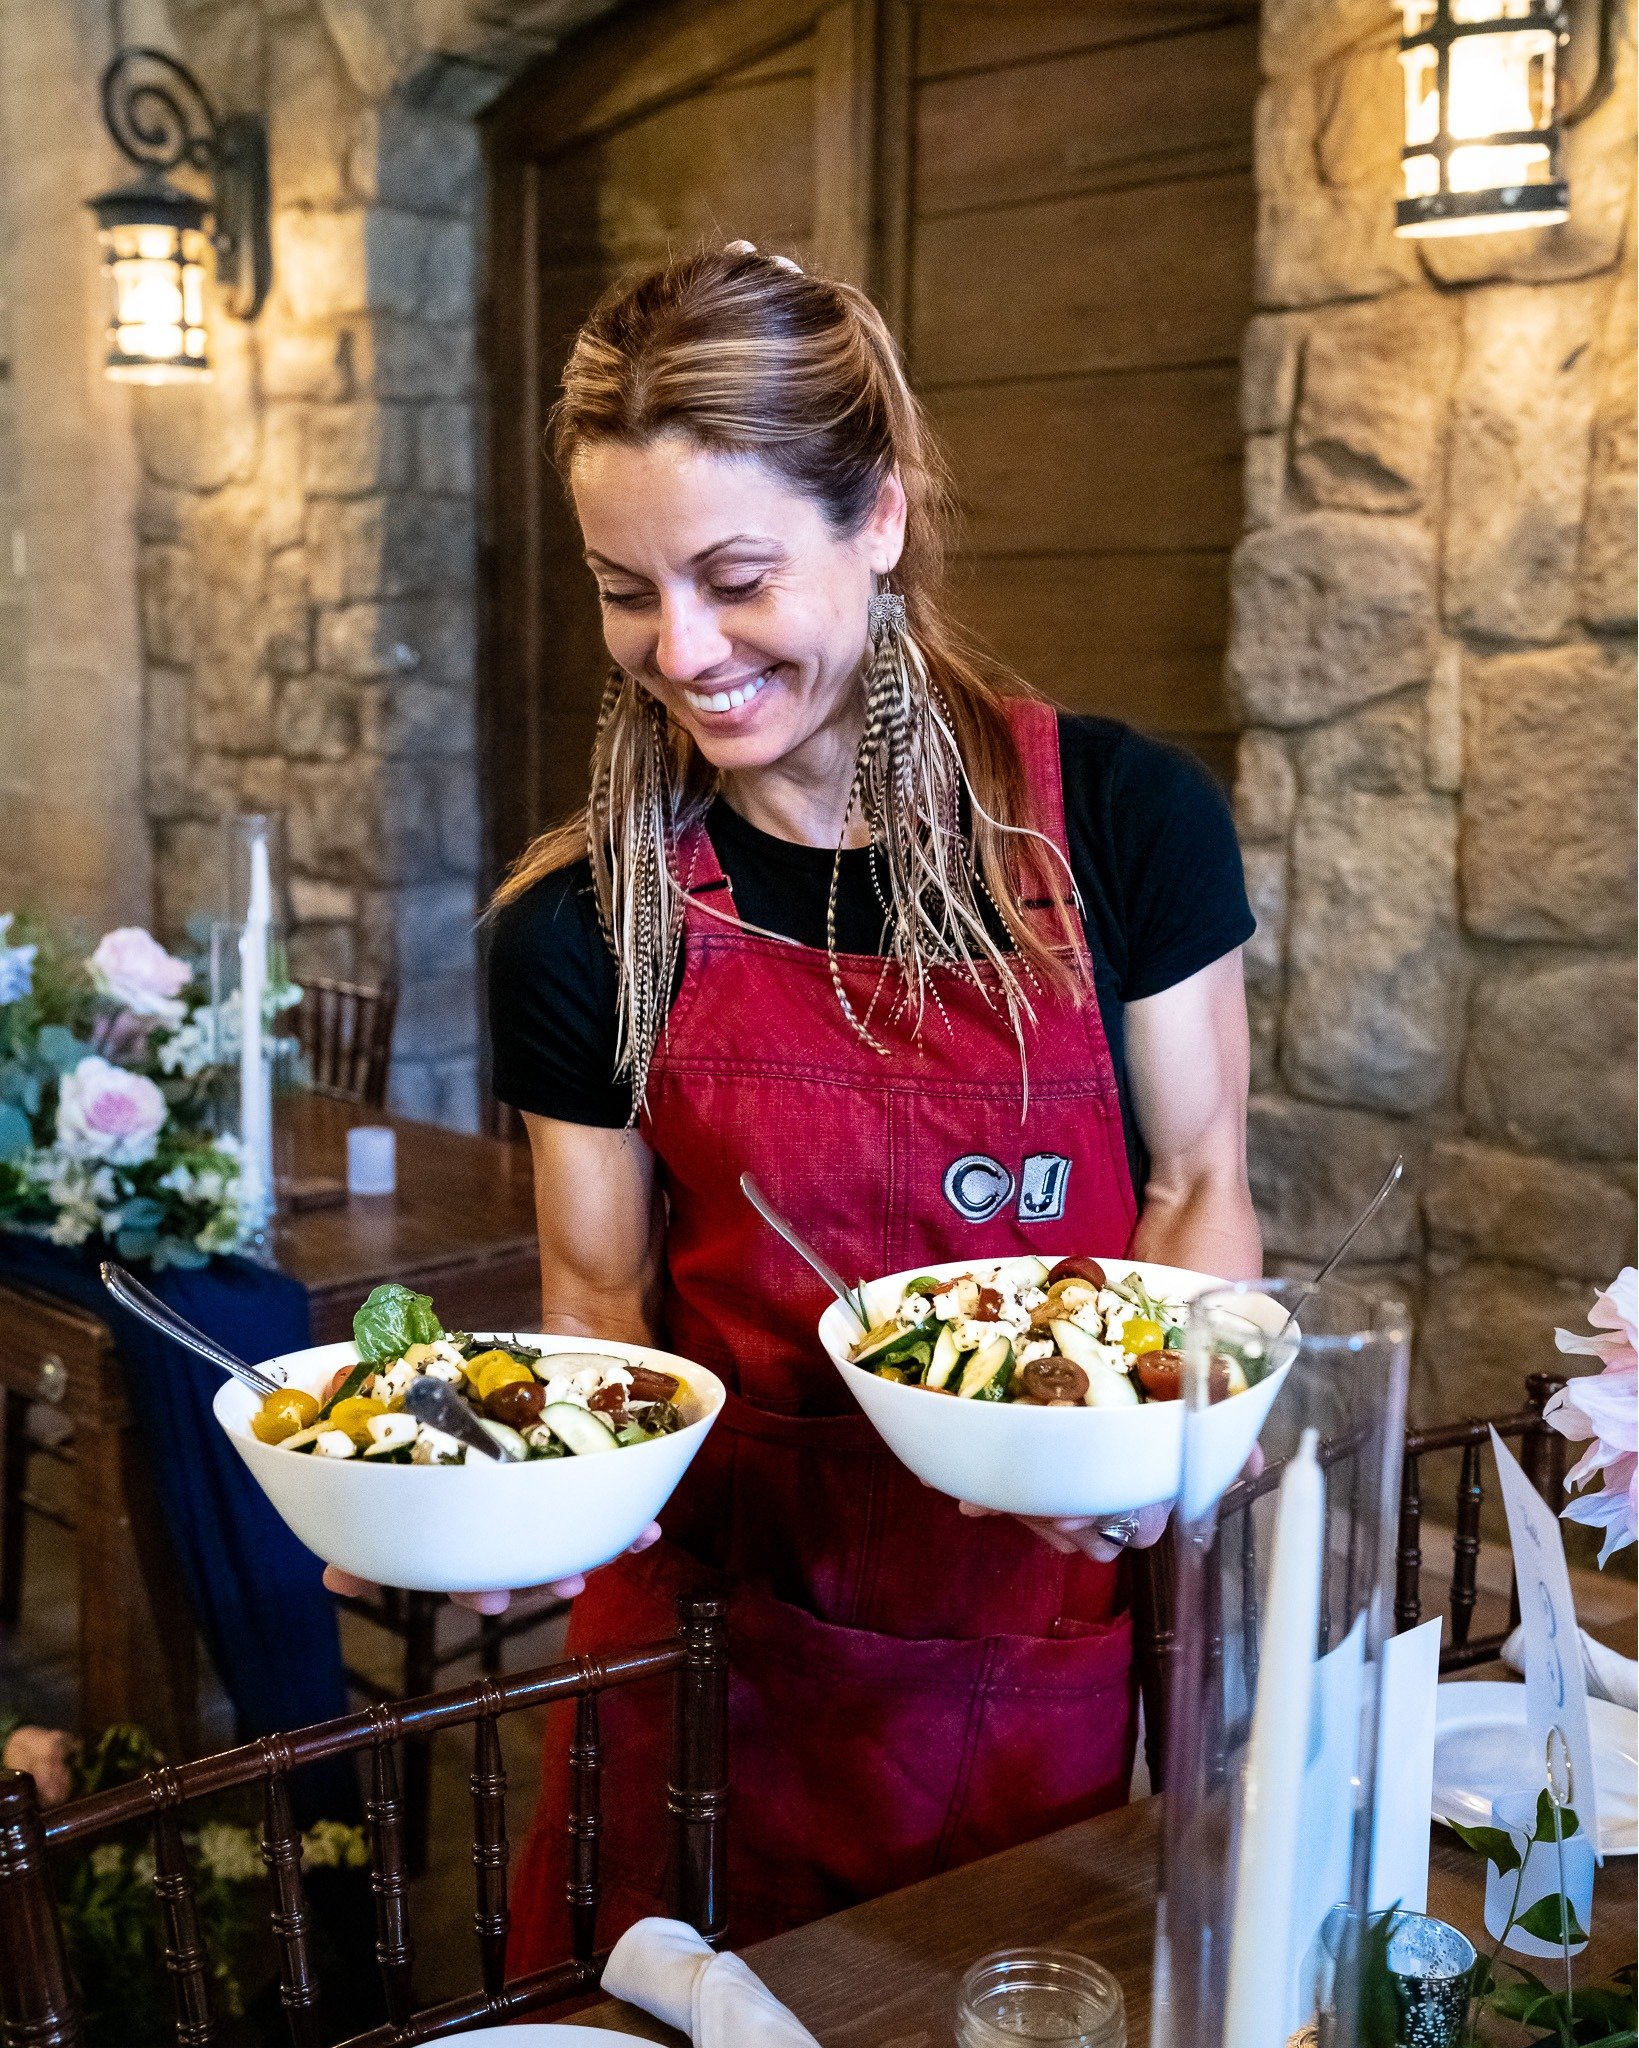 Is family-style catering right for your event?💁&zwj;♀️

Some things to consider when choosing this type of catering:
&bull; Event formality
&bull; Guest count
&bull; Table size
&bull; Food selection
&bull; Variety and flexibility 

Would you like to